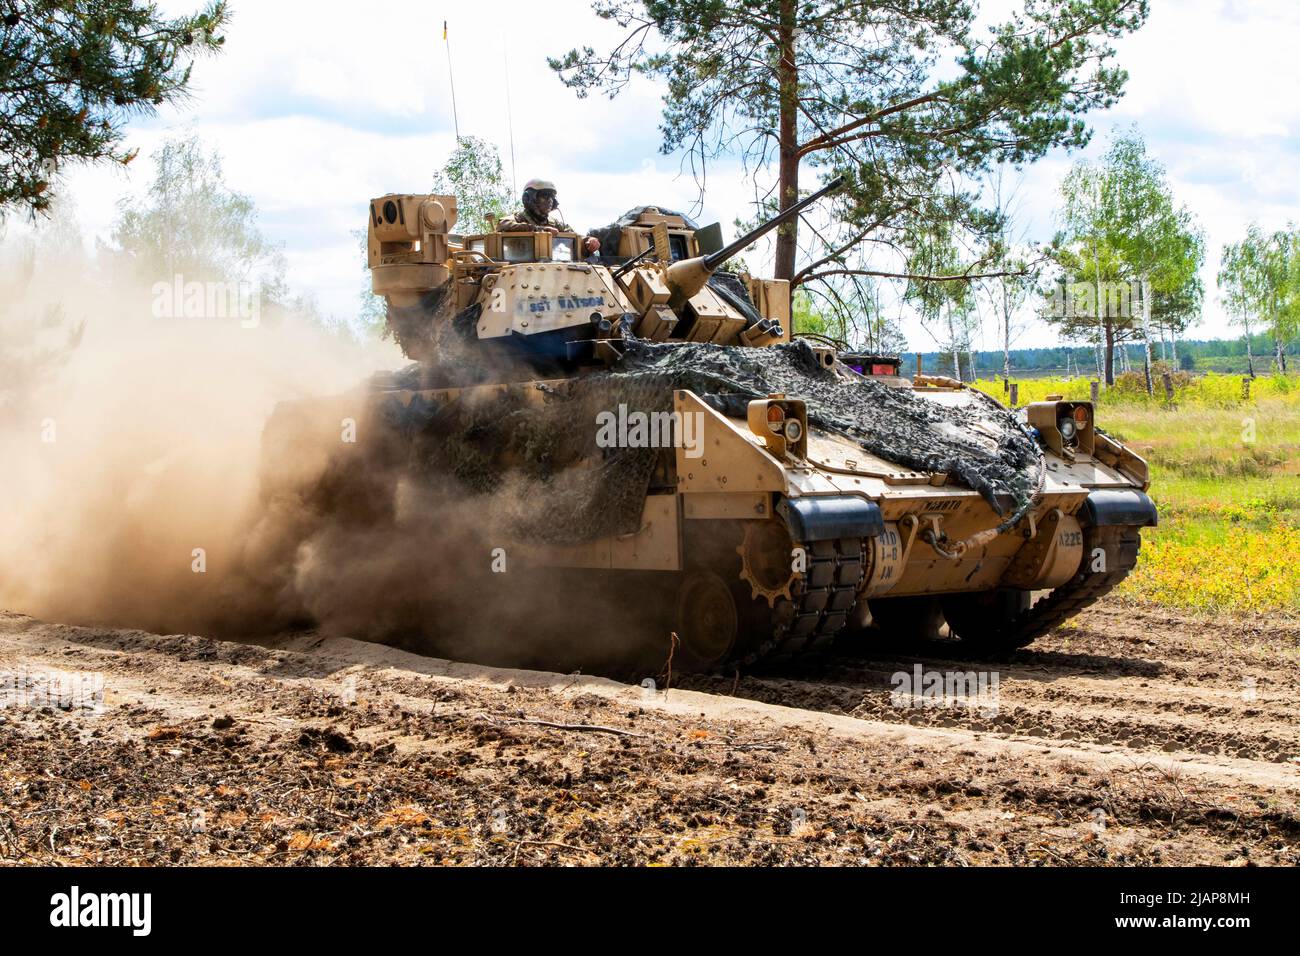 Germany. 24th May, 2022. An M2A3 Bradley fighting vehicle assigned to 1st Battalion, 8th Infantry Regiment, 3rd Armored Brigade Combat Team, 4th Infantry Division, advances during a live-fire exercise as part of DEFENDER-Europe 22 at Oberlausitz Training Area, Germany, May 24, 2022. DEFENDER-Europe 22 is a series of U.S. Army Europe and Africa multinational training exercises within U.S. European Commands Large Global Scale Exercise construct taking place in Eastern Europe. DEFENDER-Europe 22 demonstrates U.S. Army Europe and Africa's ability to conduct large scale ground combat operations ac Stock Photo